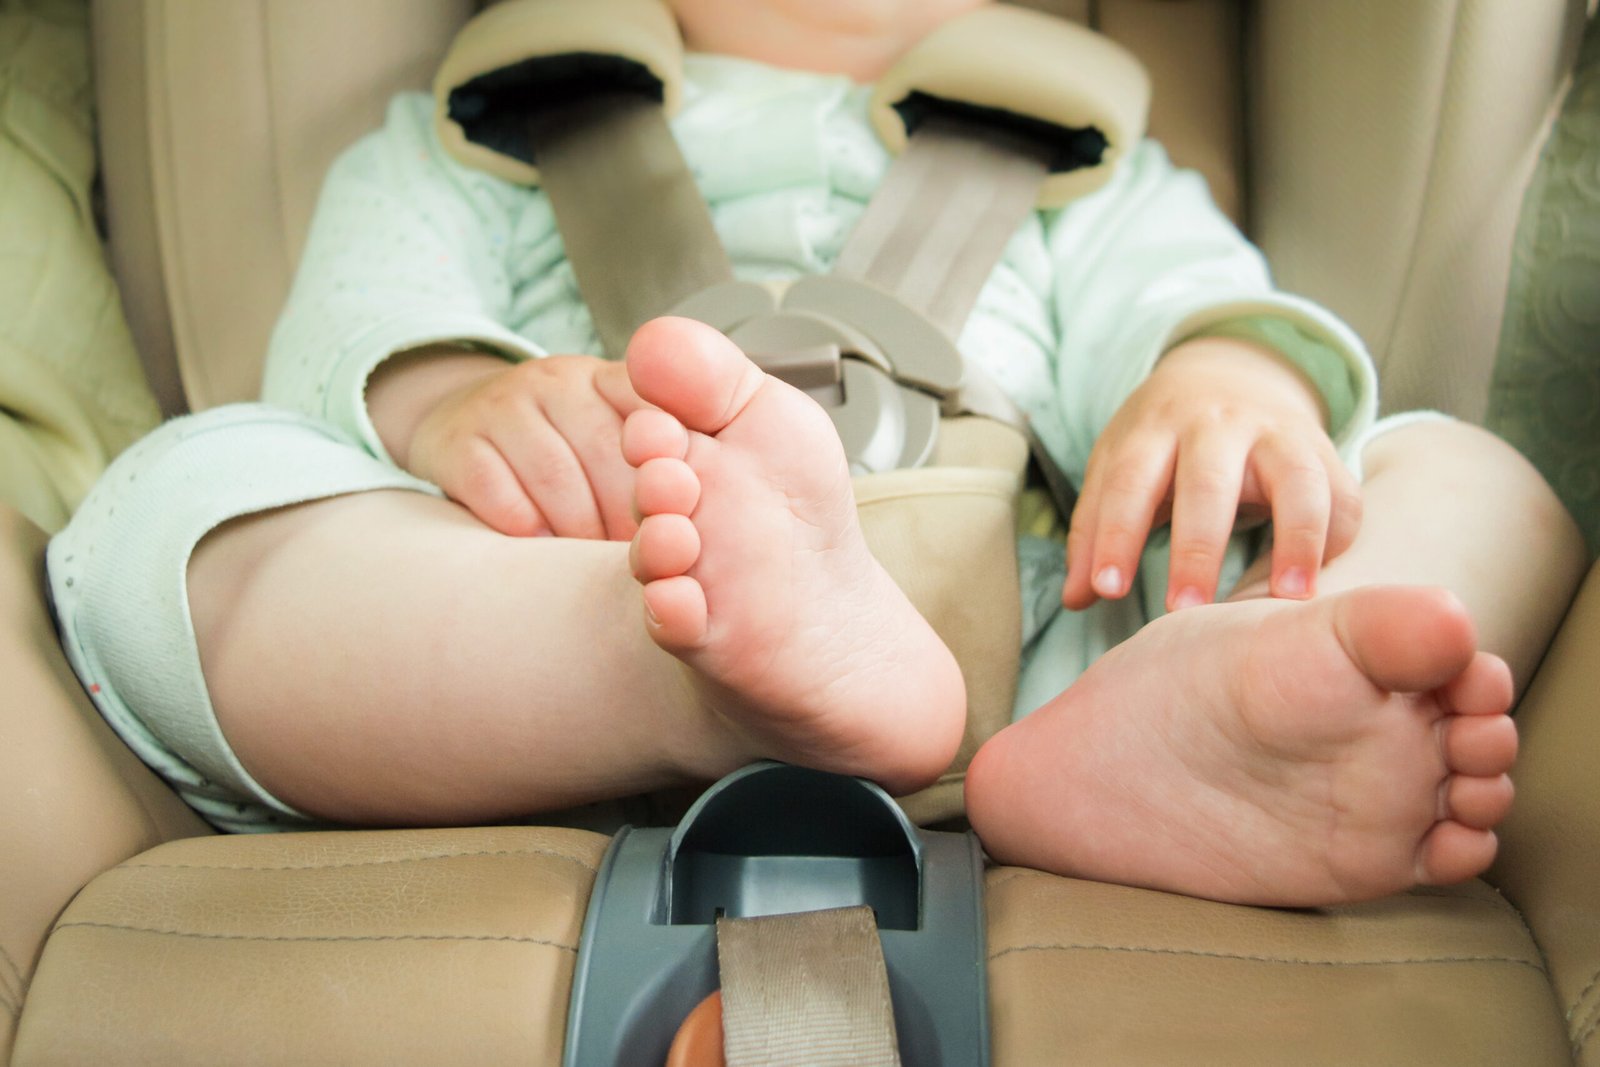 Top tips for choosing a car seat